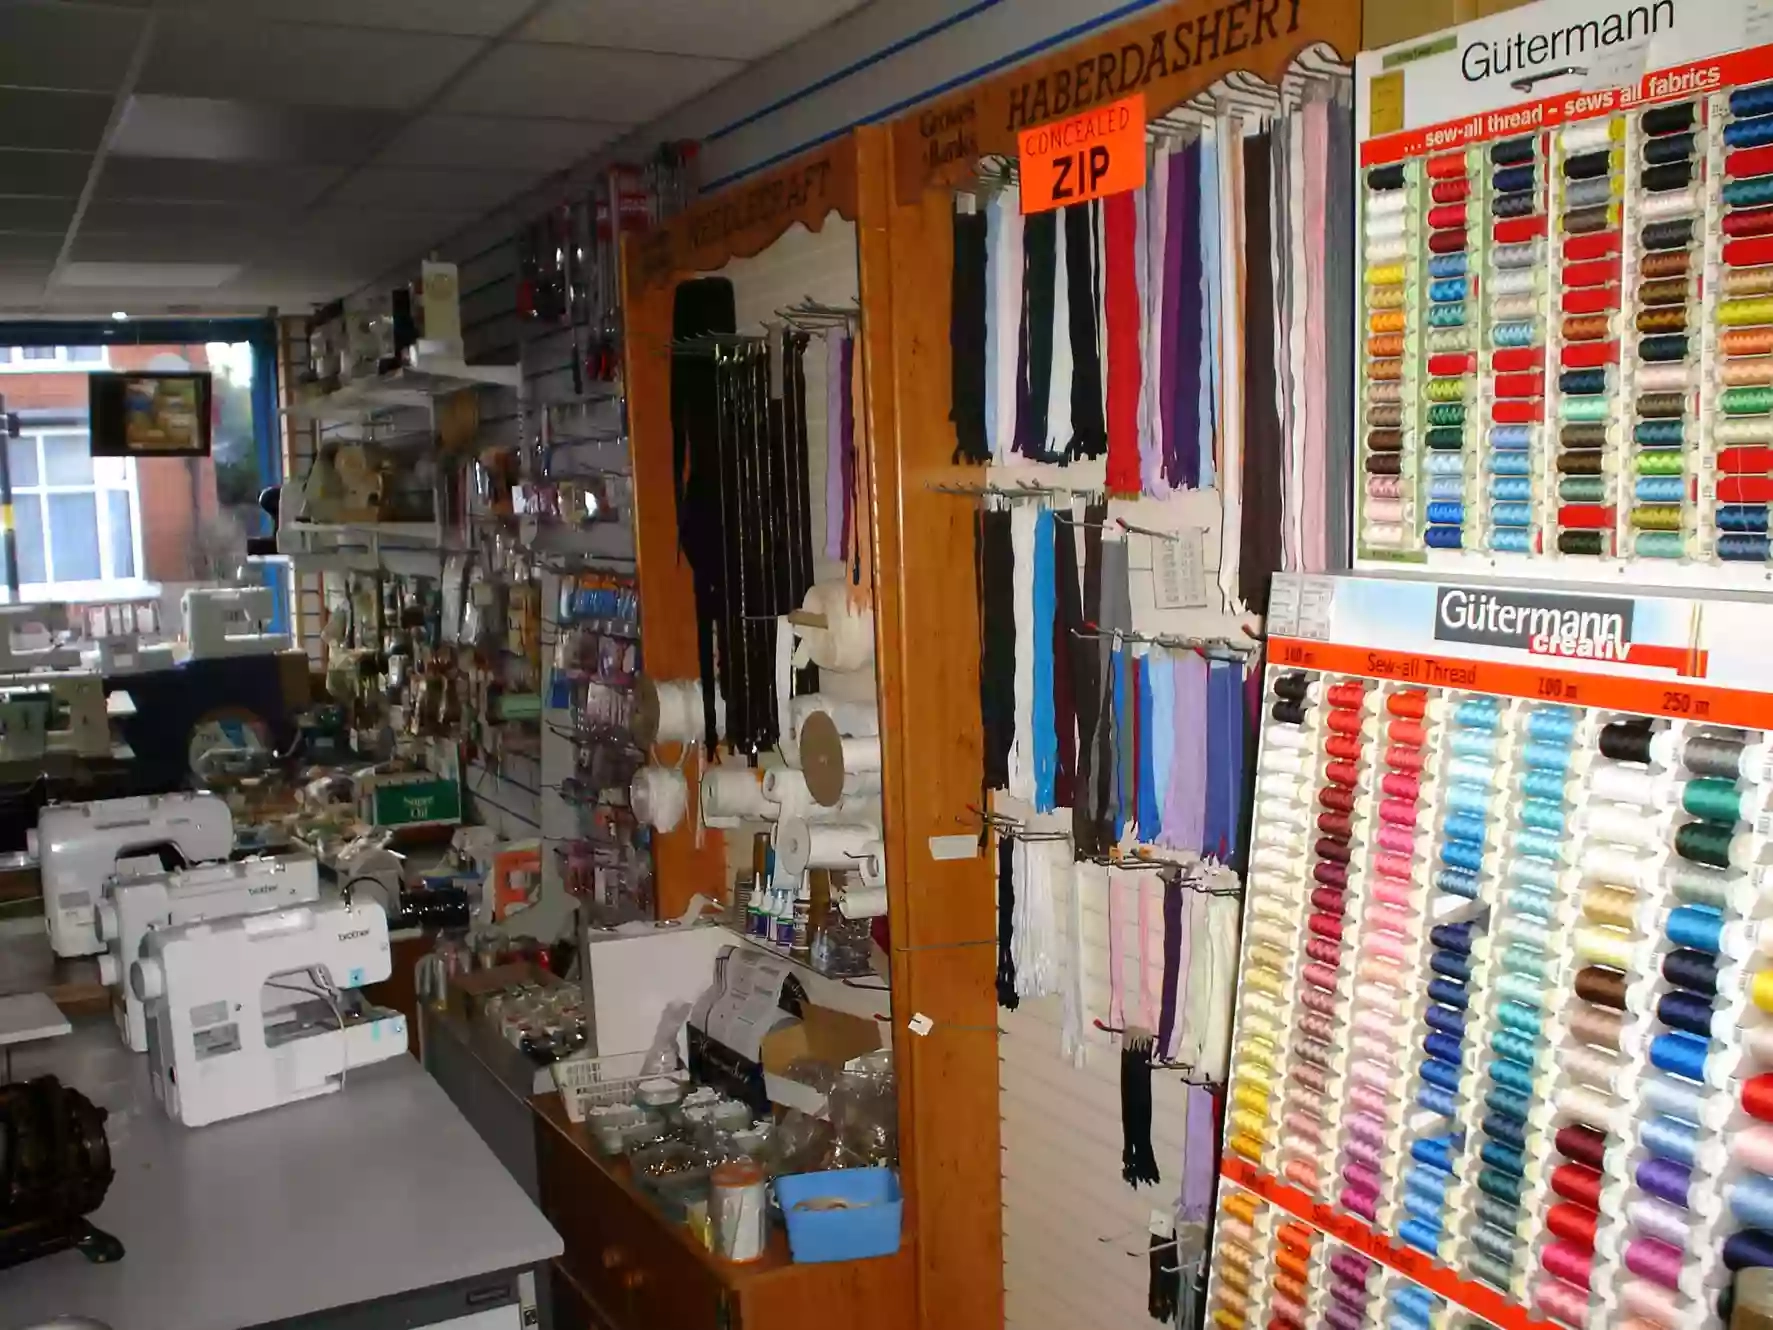 D.C.Sewing Machines Services & haberdashery